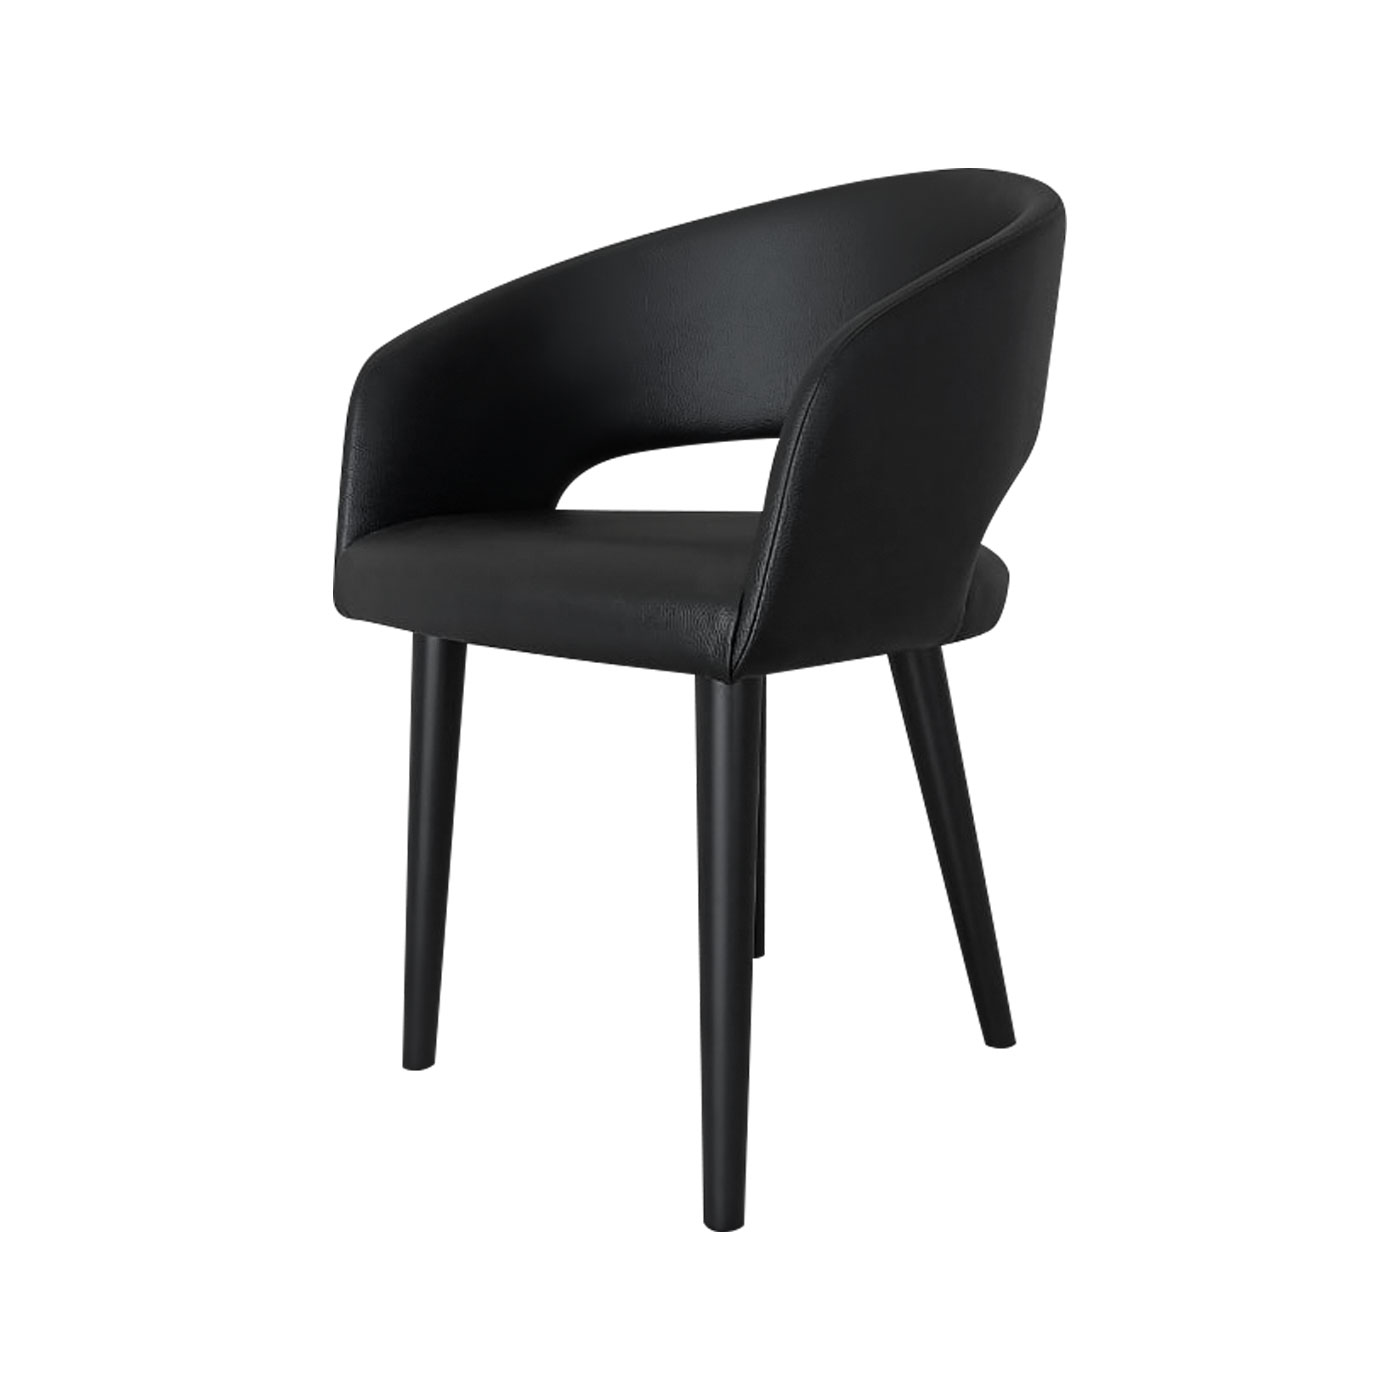 Ostrava Faux Leather Ebony Dining Chair